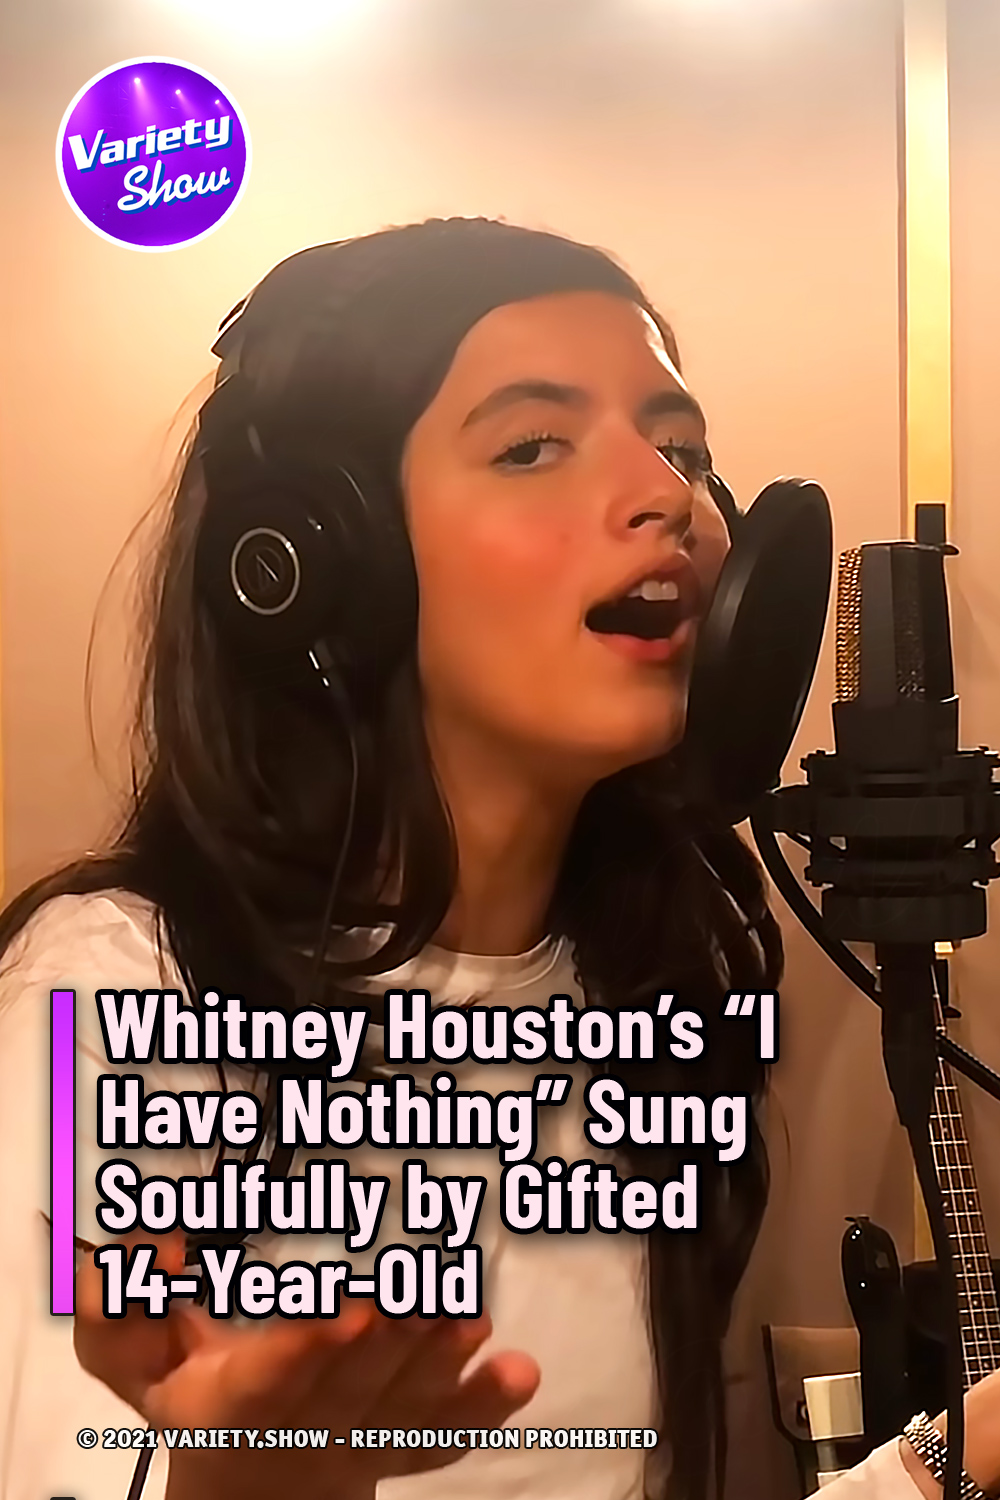 Whitney Houston’s “I Have Nothing” Sung Soulfully by Gifted 14-Year-Old